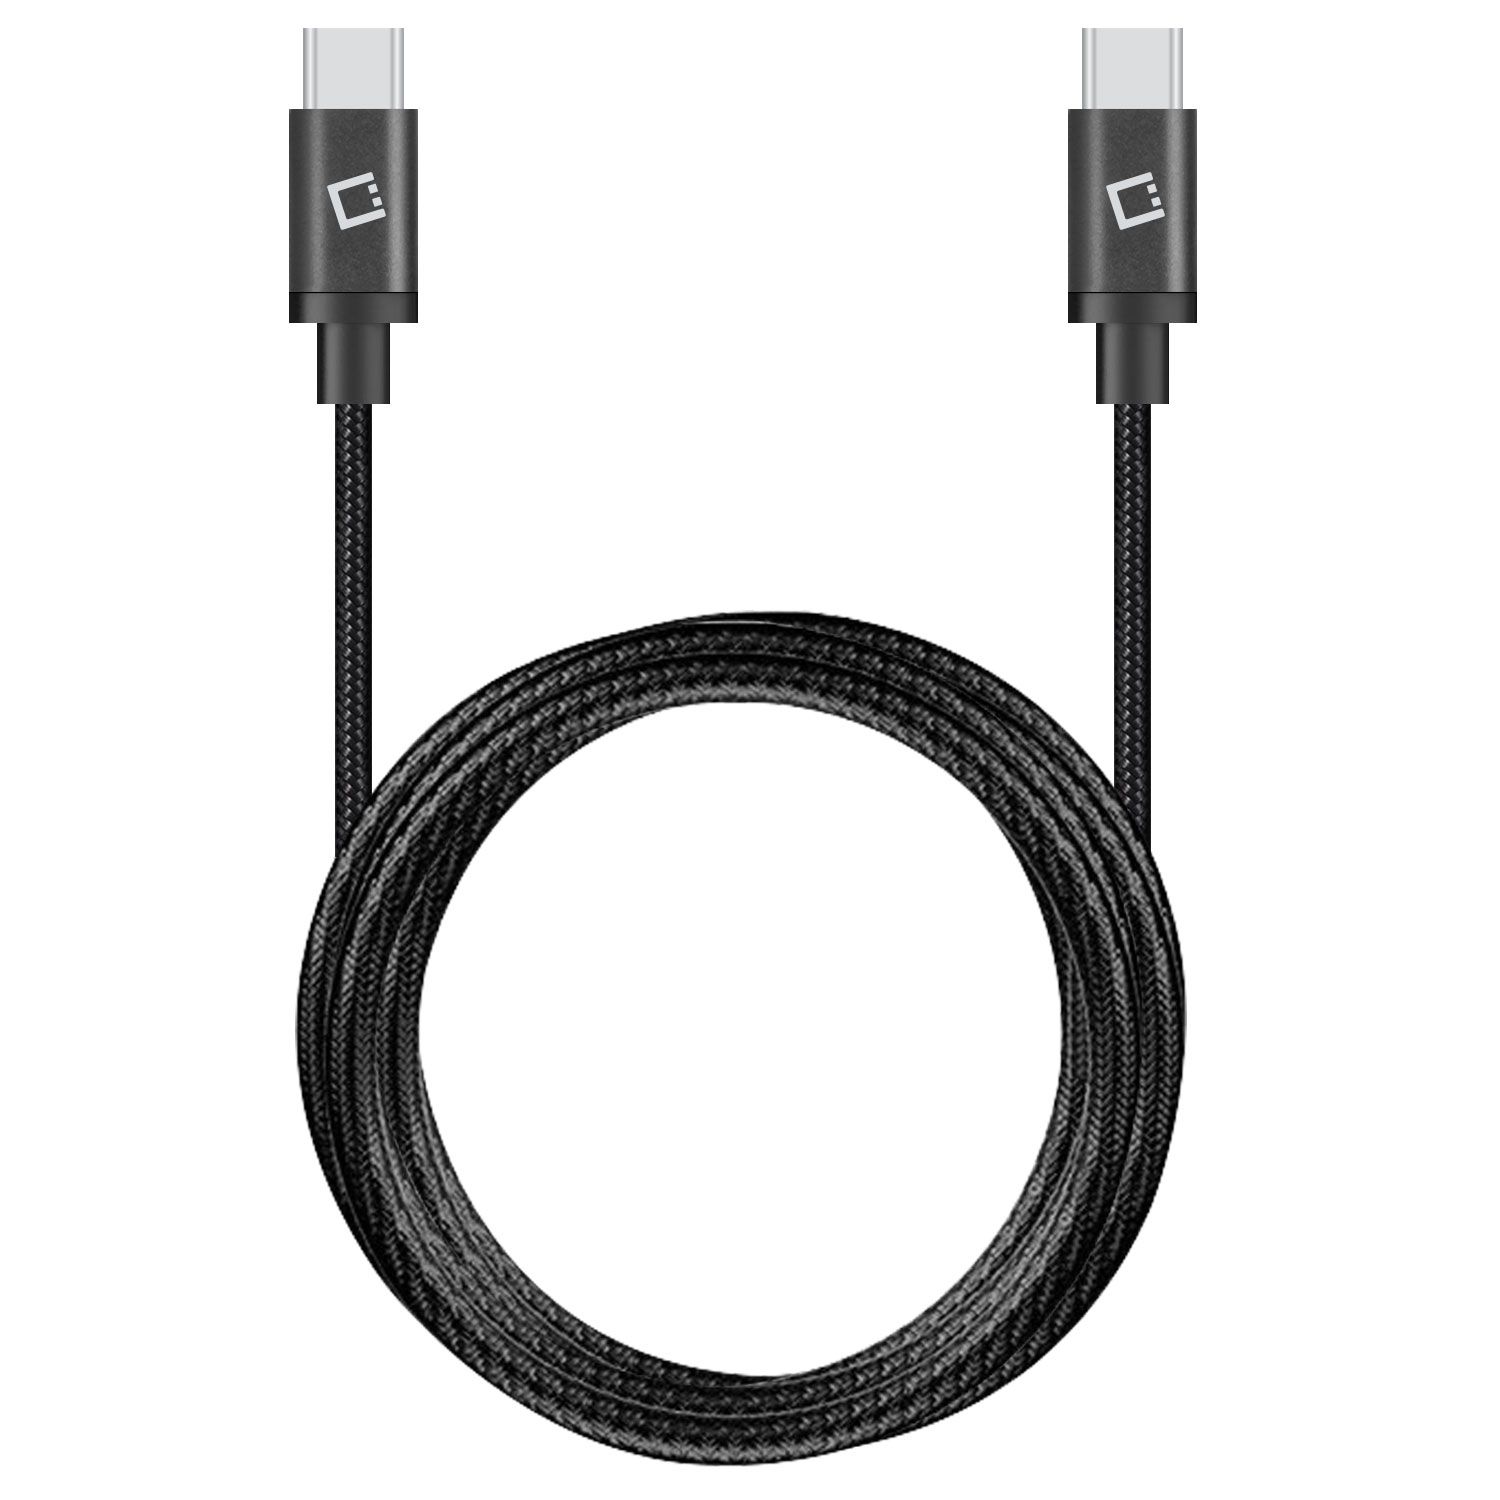 Cellet USB-C to USB-C Cable Compatible with Samsung Galaxy Z Flip, Heavy Duty Braided USB Type-C to Type-C Cable (6 feet/1.8 meters) and Atom Wipe - image 1 of 9